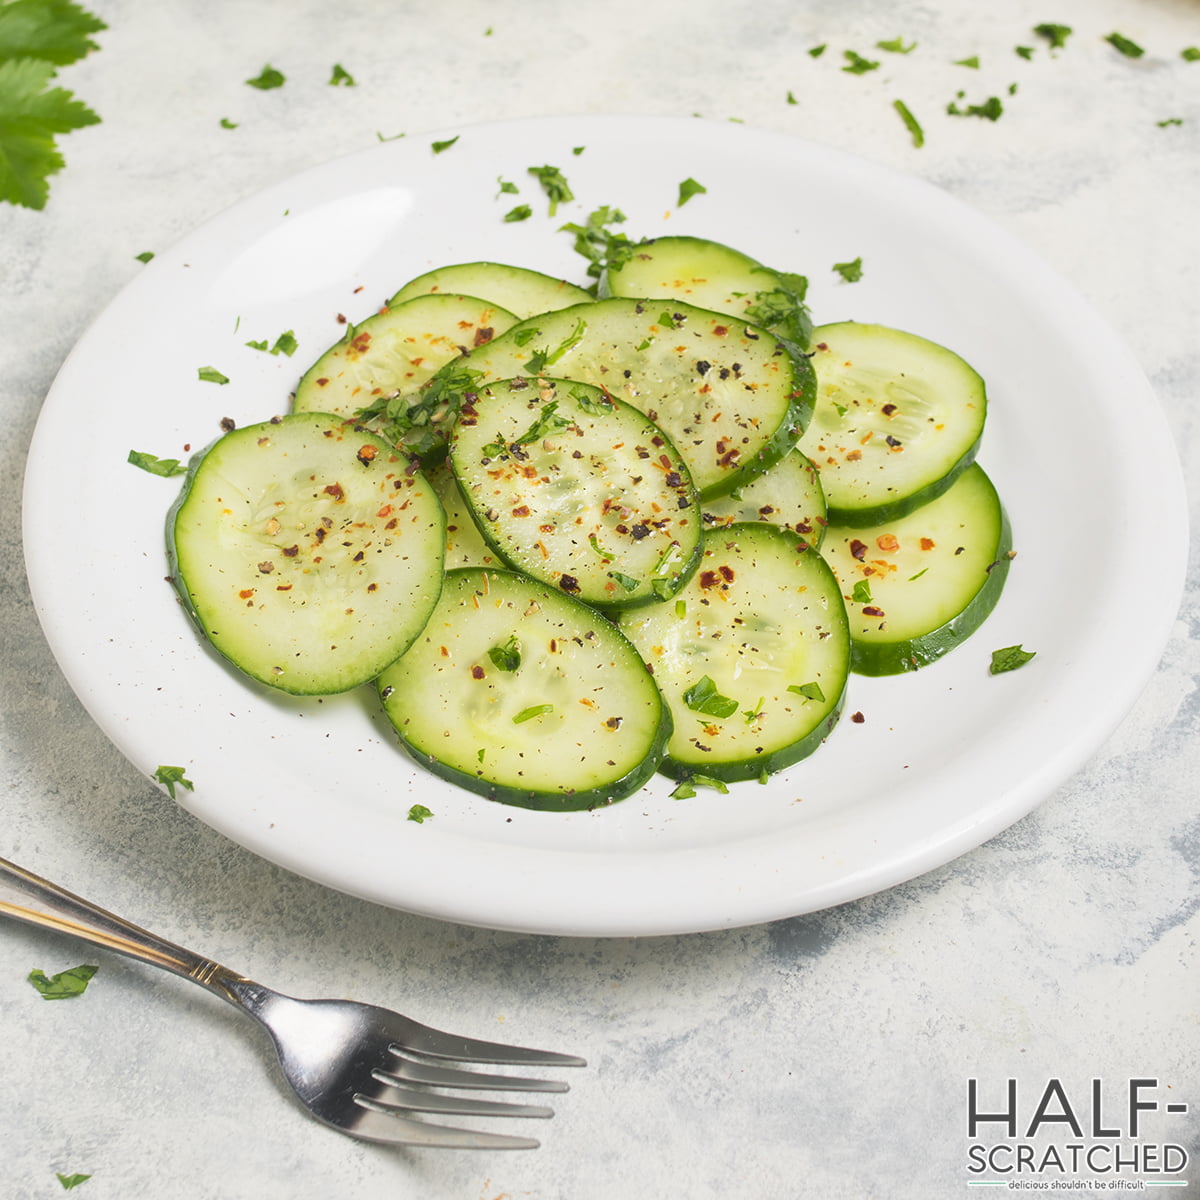 Cucumber slices seasoned on a plate